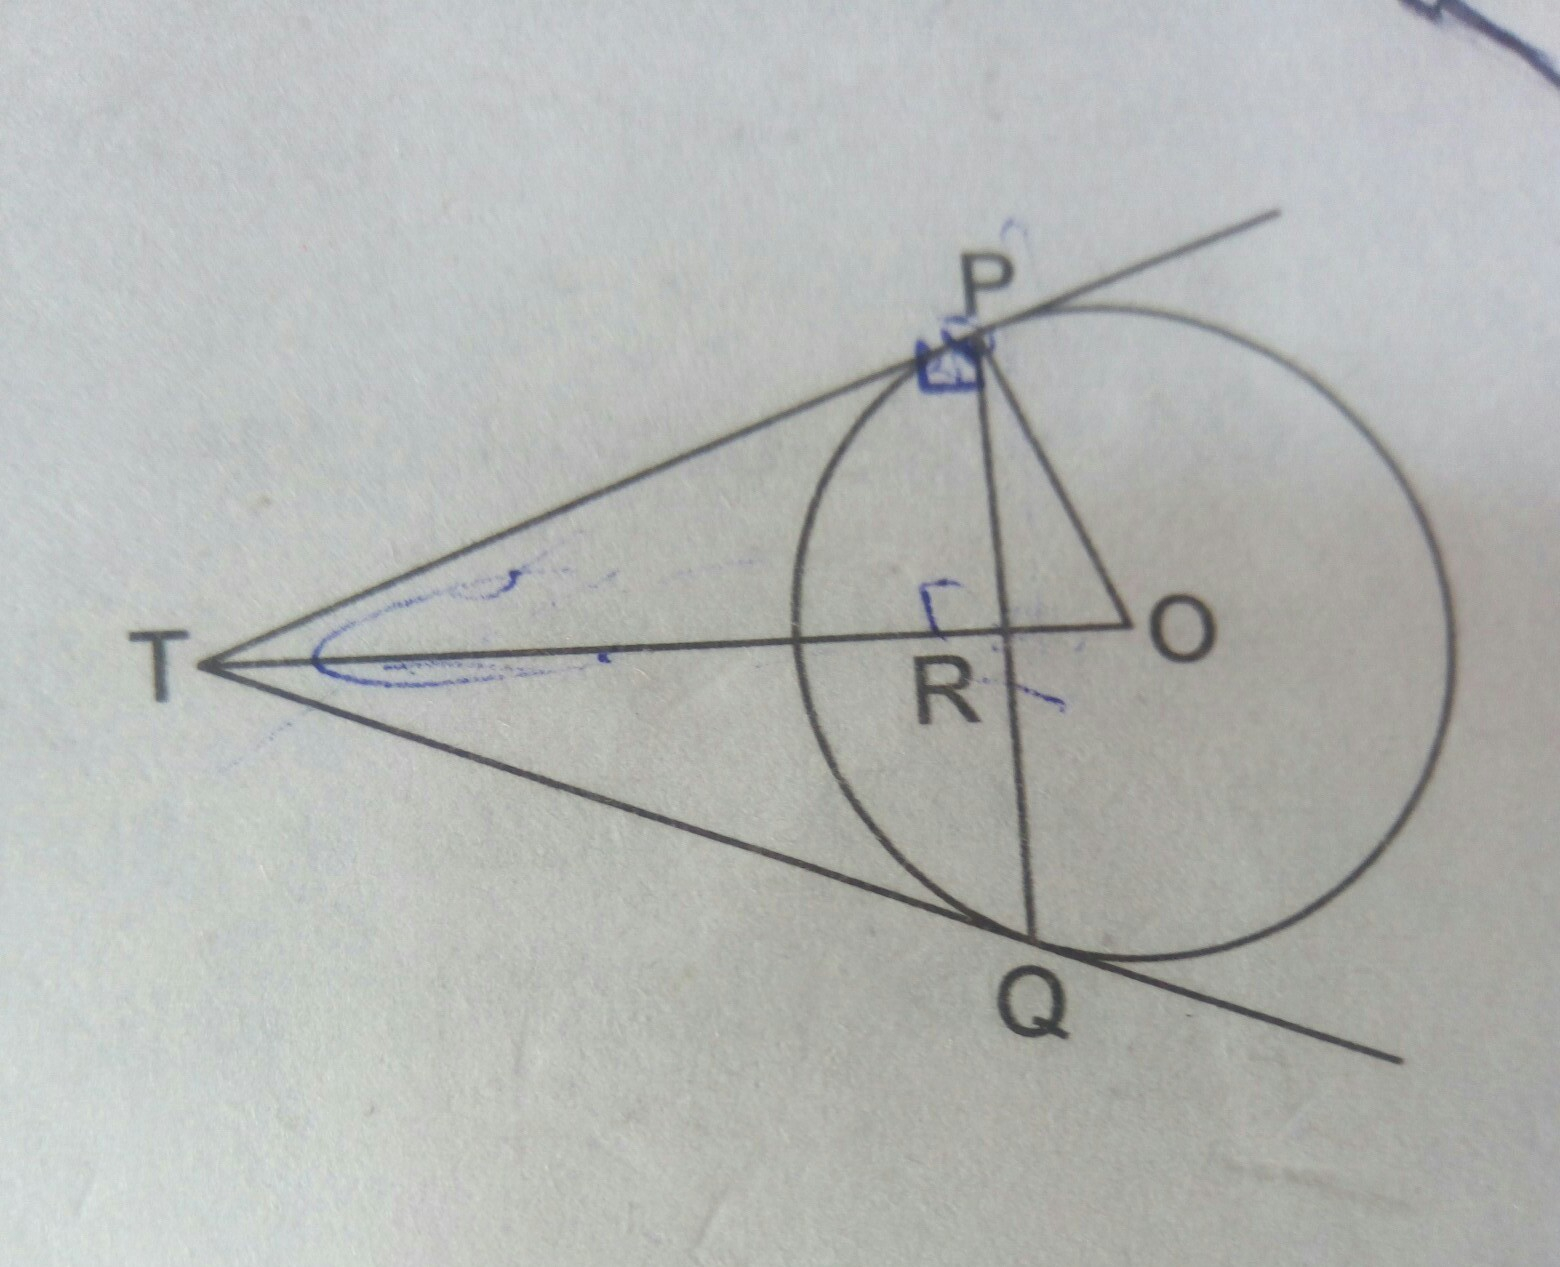 C M Chord Pq Is A Chord Of Length 48 Cm Of A Circle Of Radius 3 Cm T The